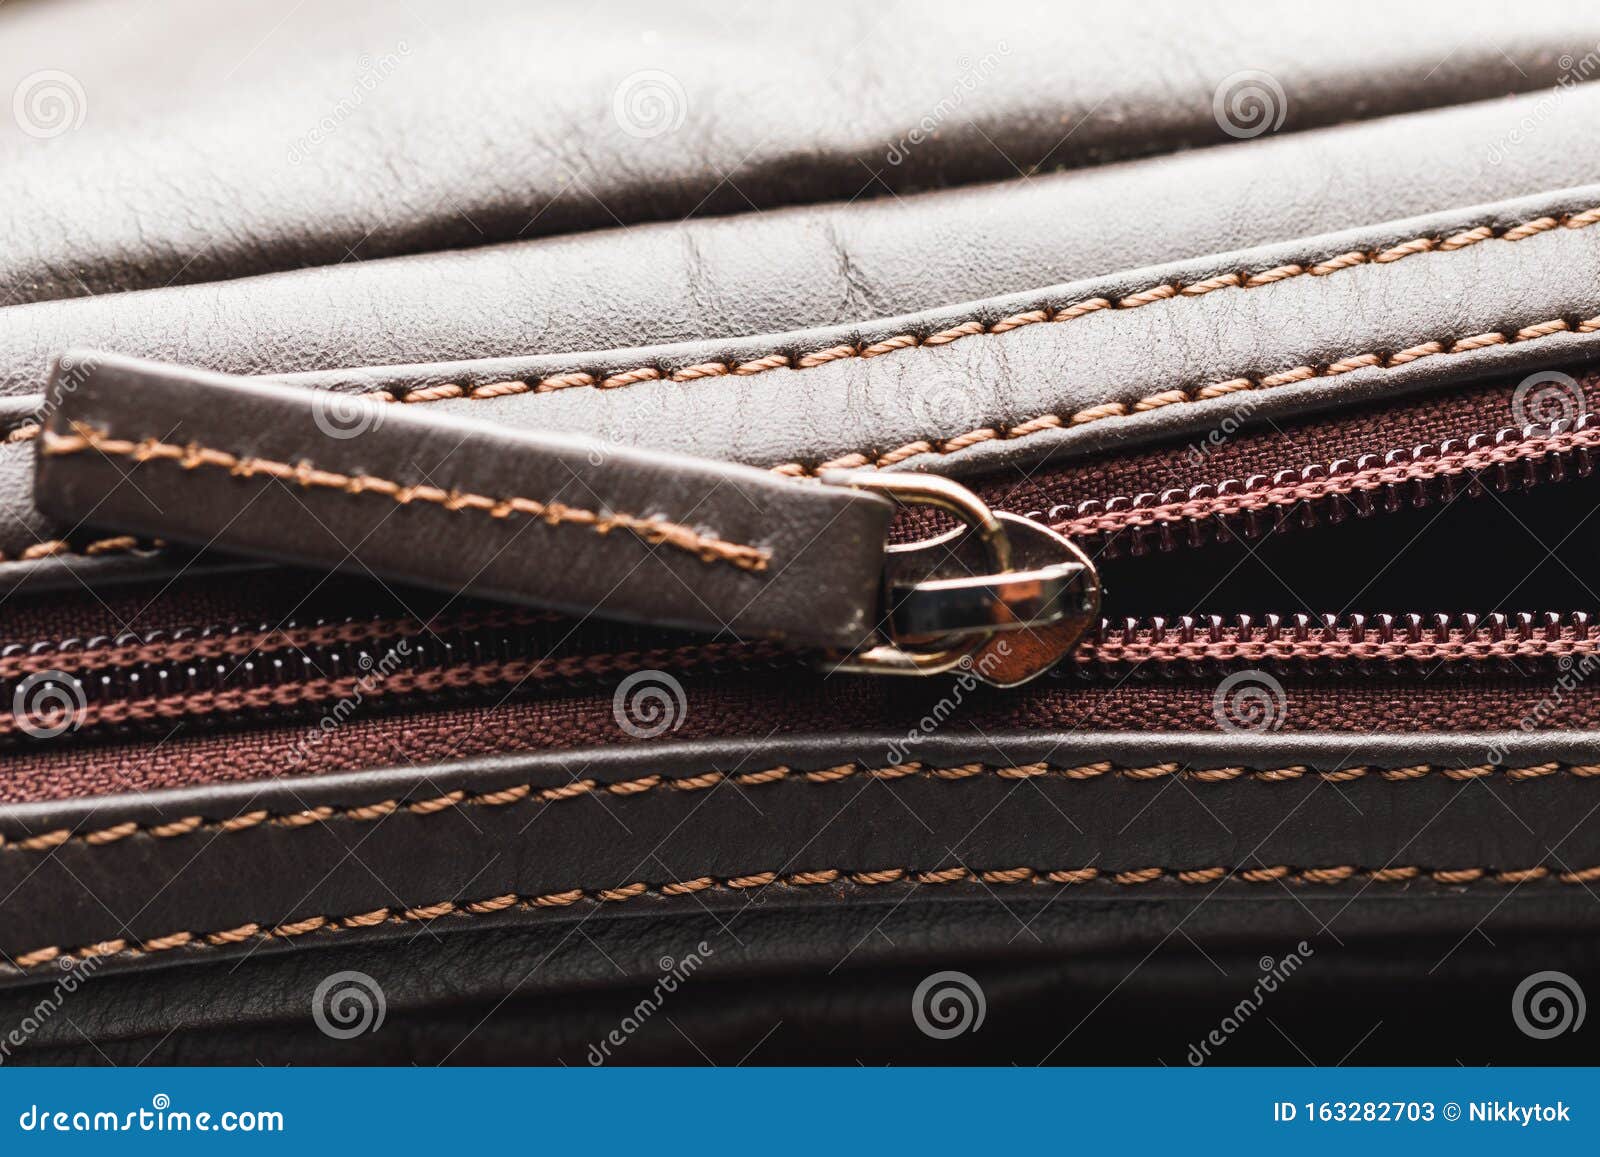 Zipper of Brown Leather Bag Stock Image - Image of crumpled, leather ...